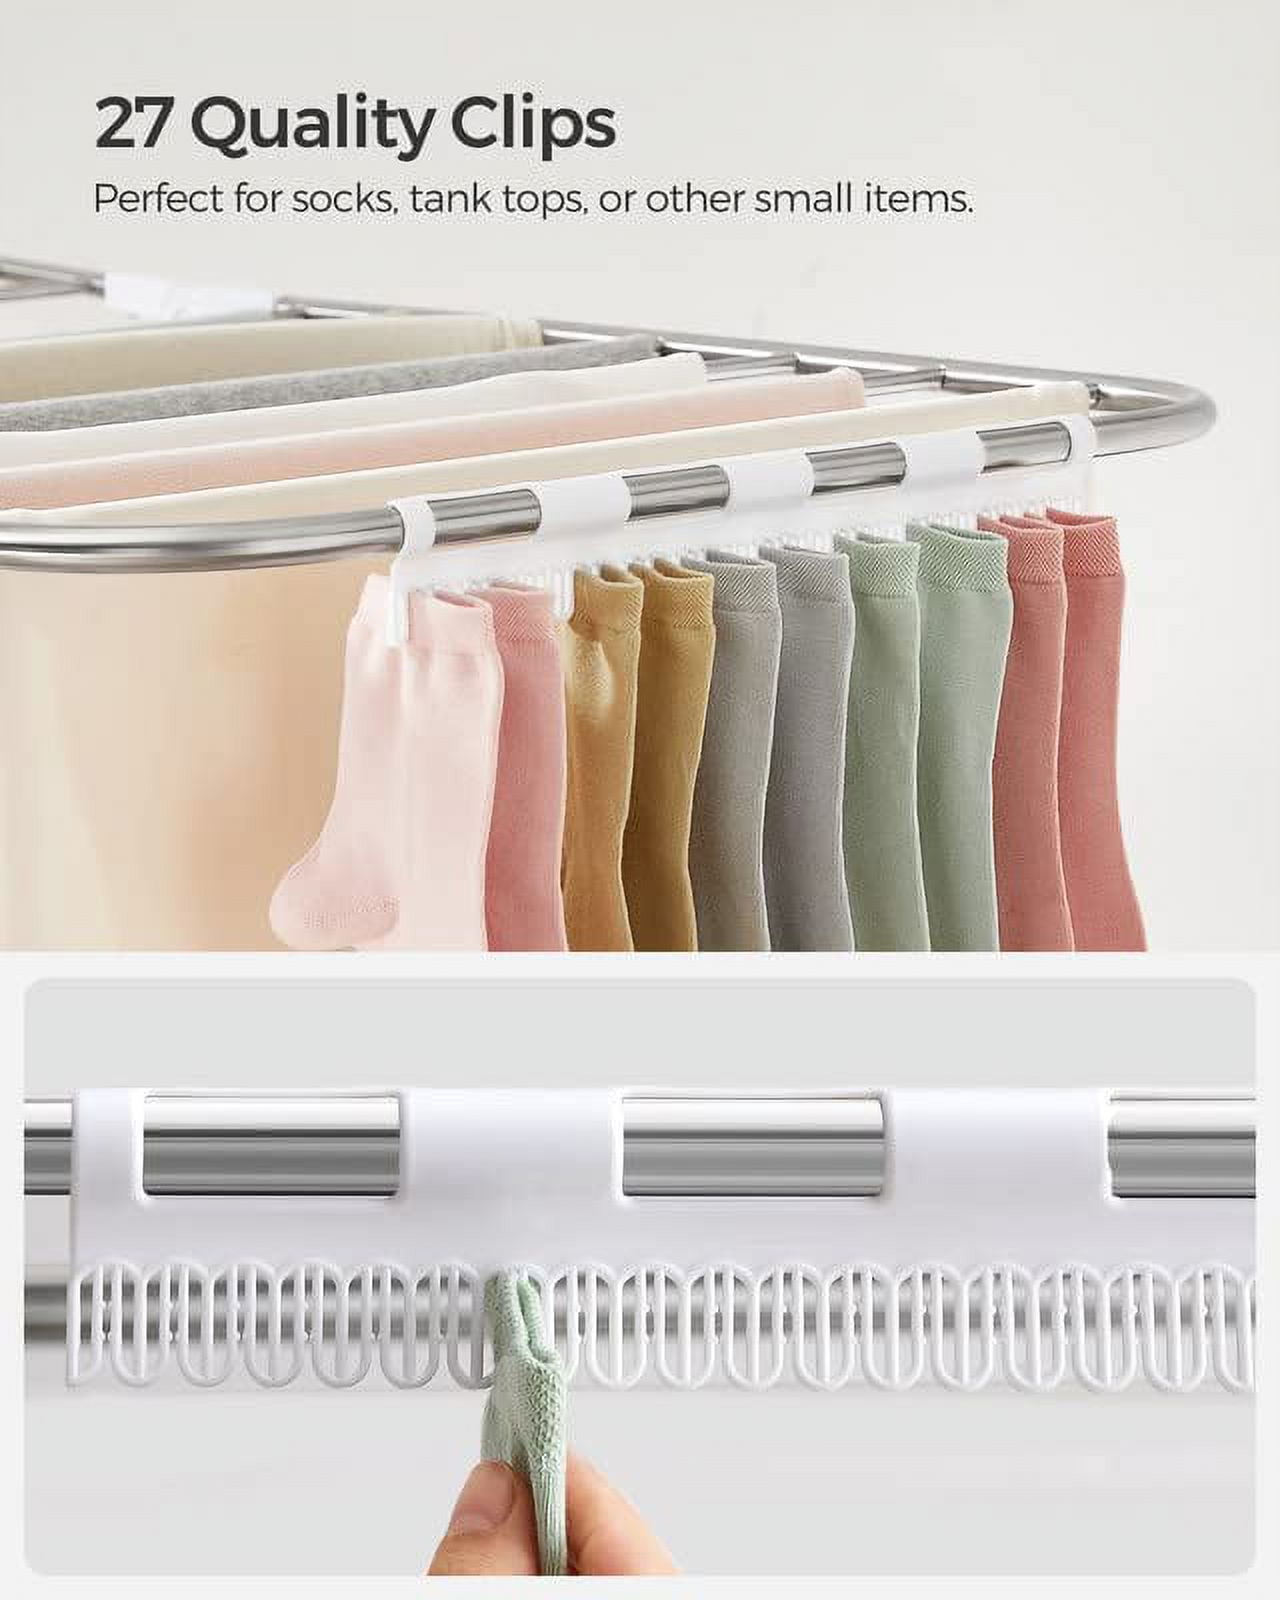  LBWF Electric Heated Clothes Drying Rack, Foldable